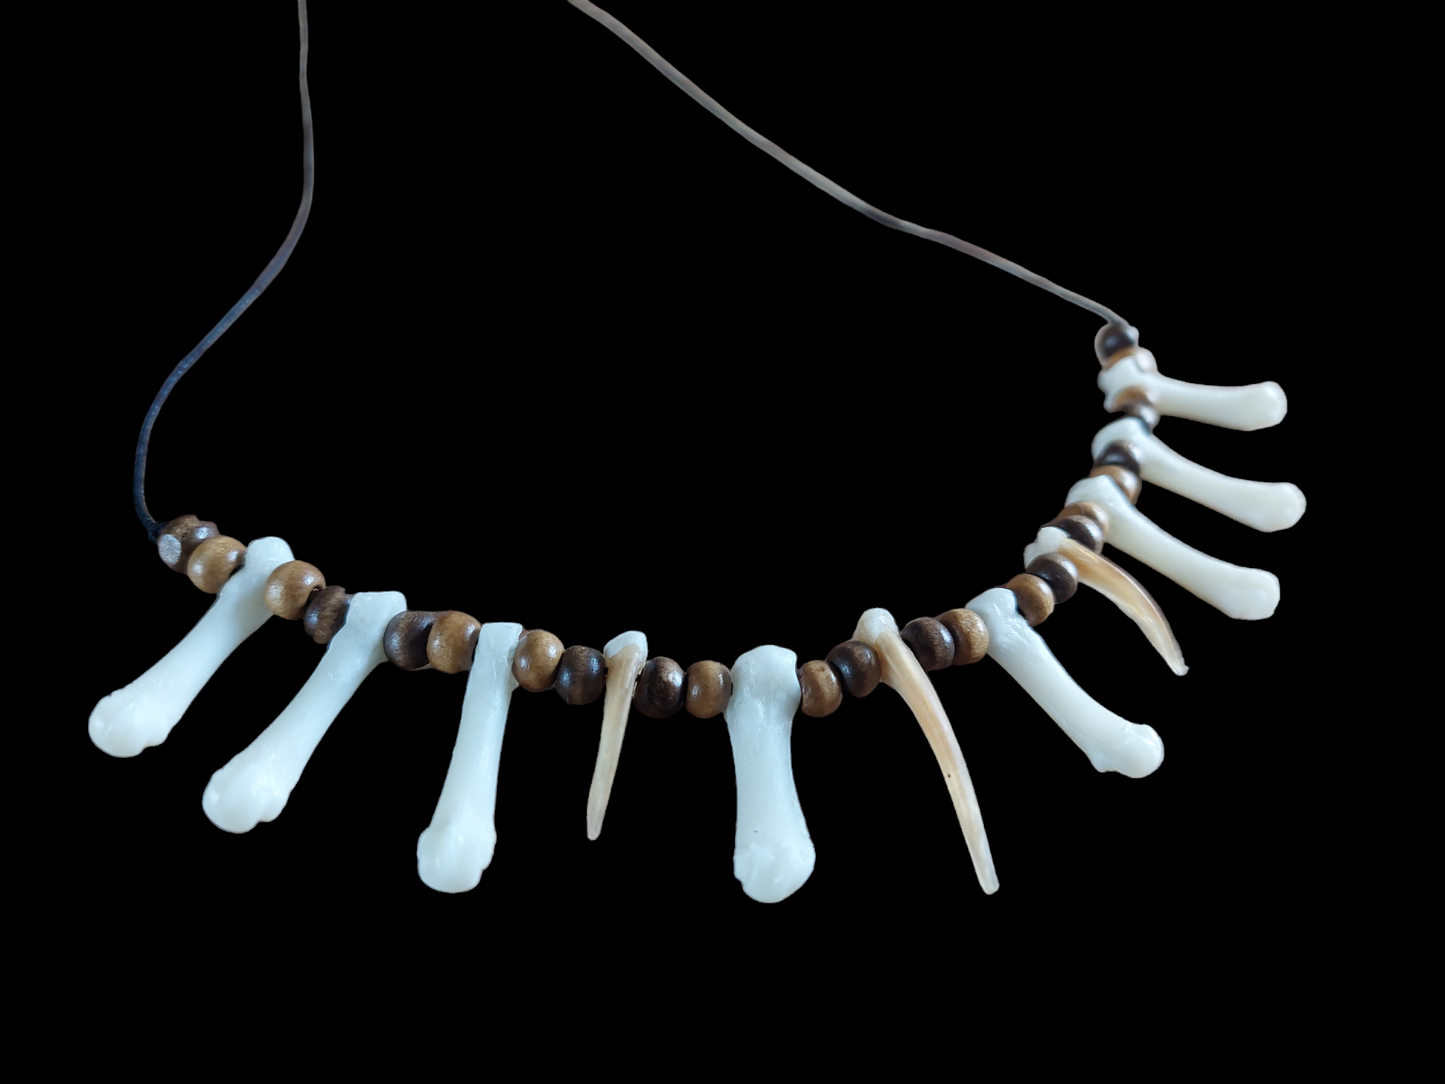 Badger claws and foot bones amulet necklace